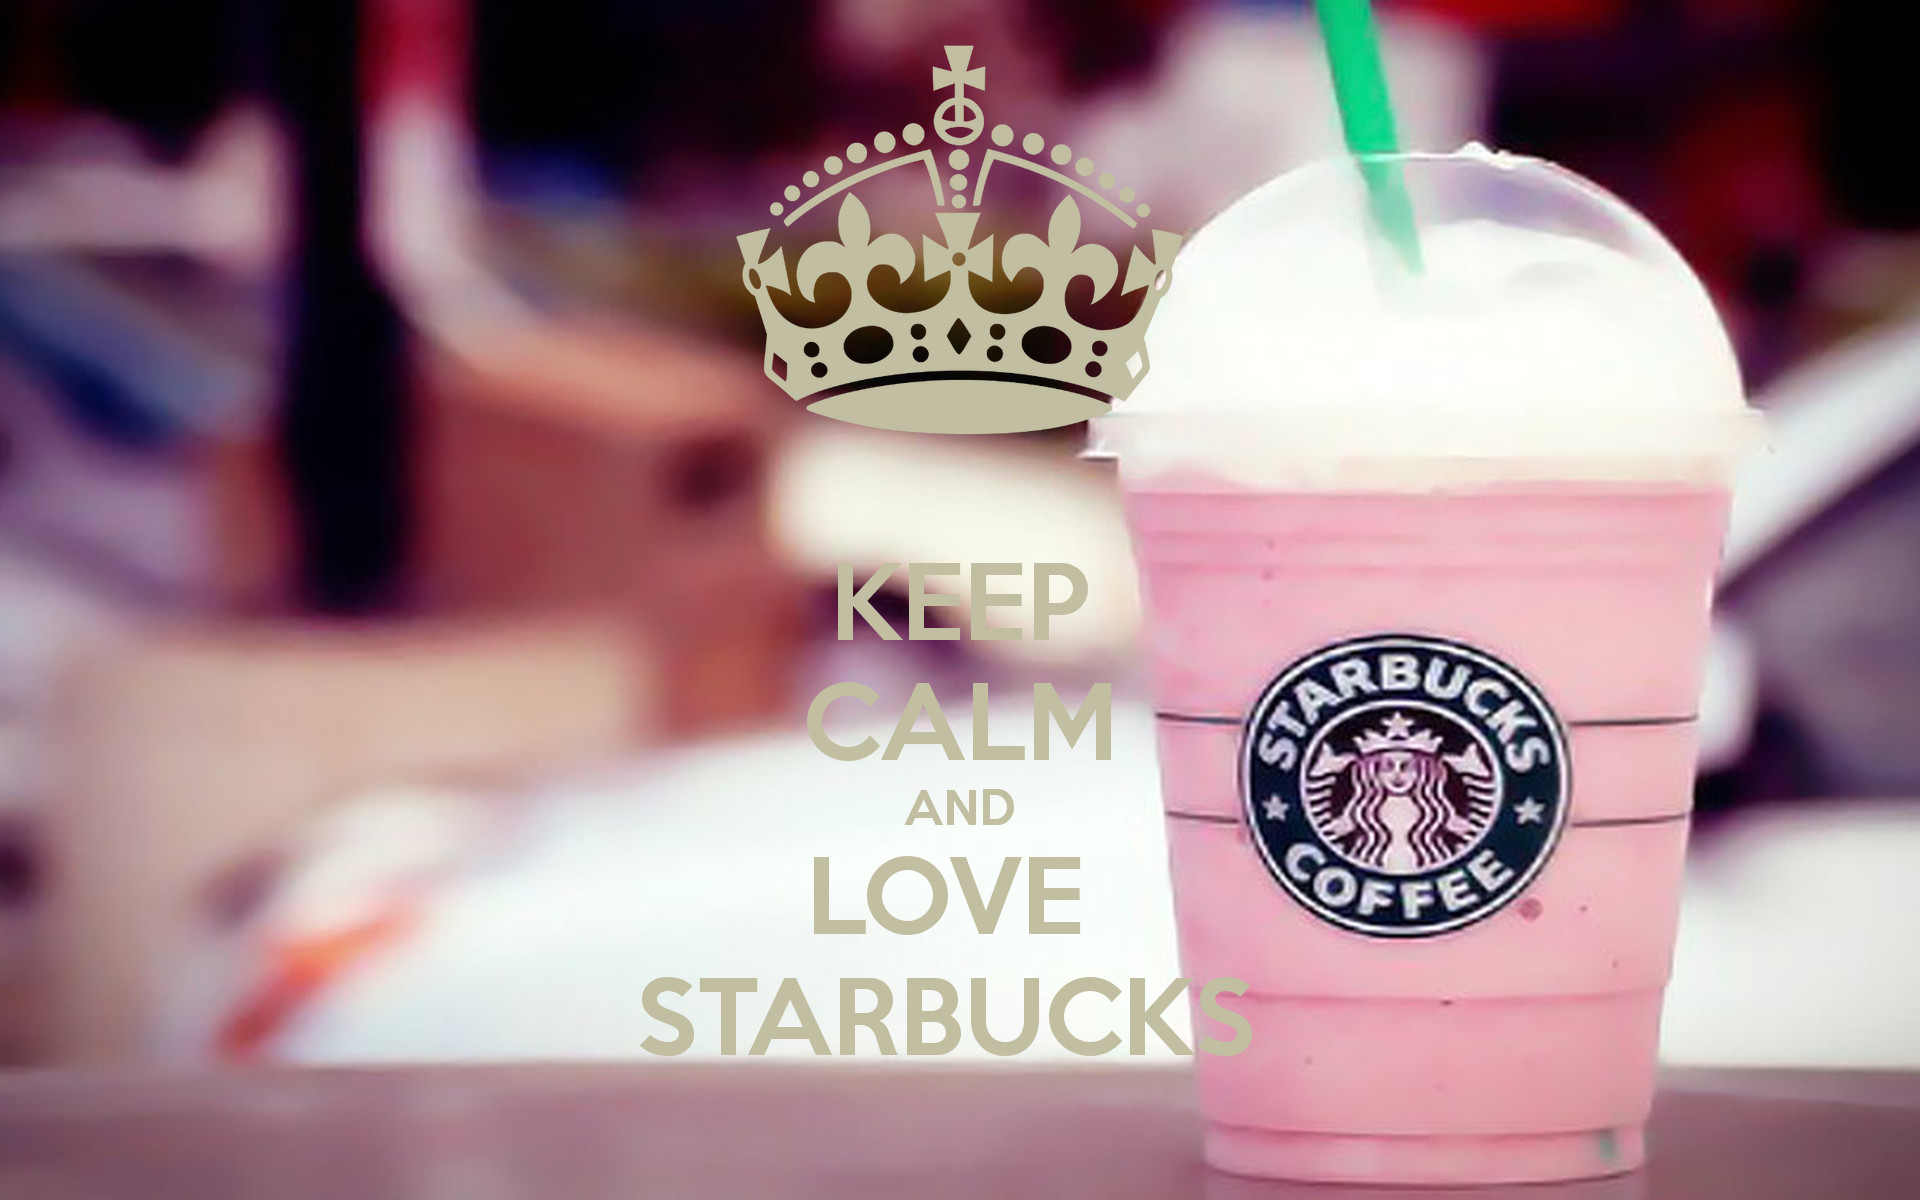 Keep calm and love starbucks wallpapers